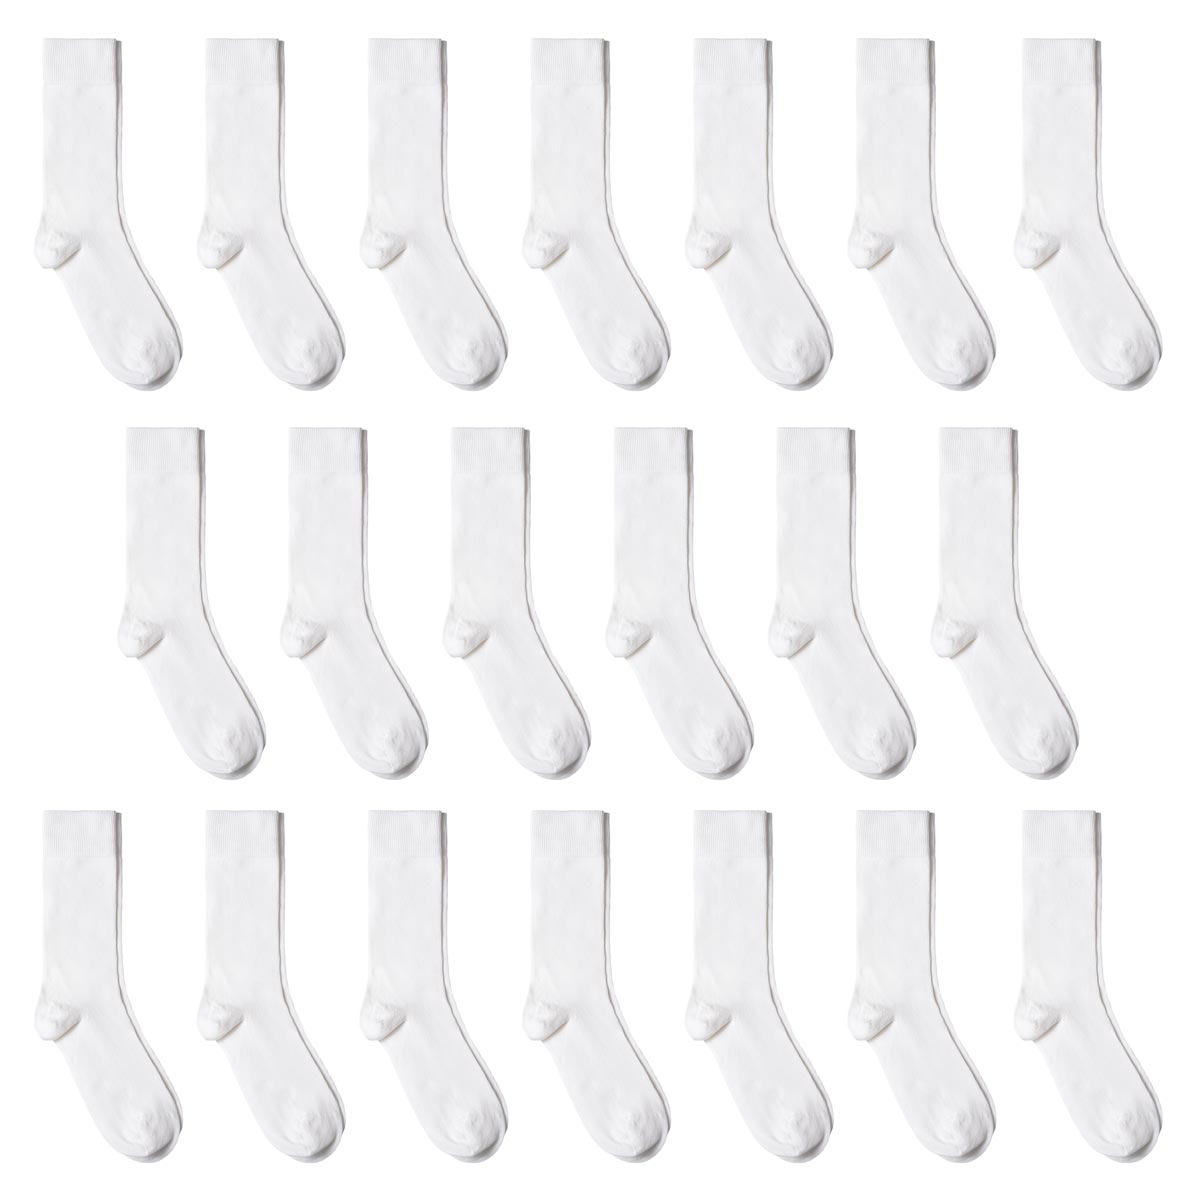 Lot 5 paires chaussettes blanches unies